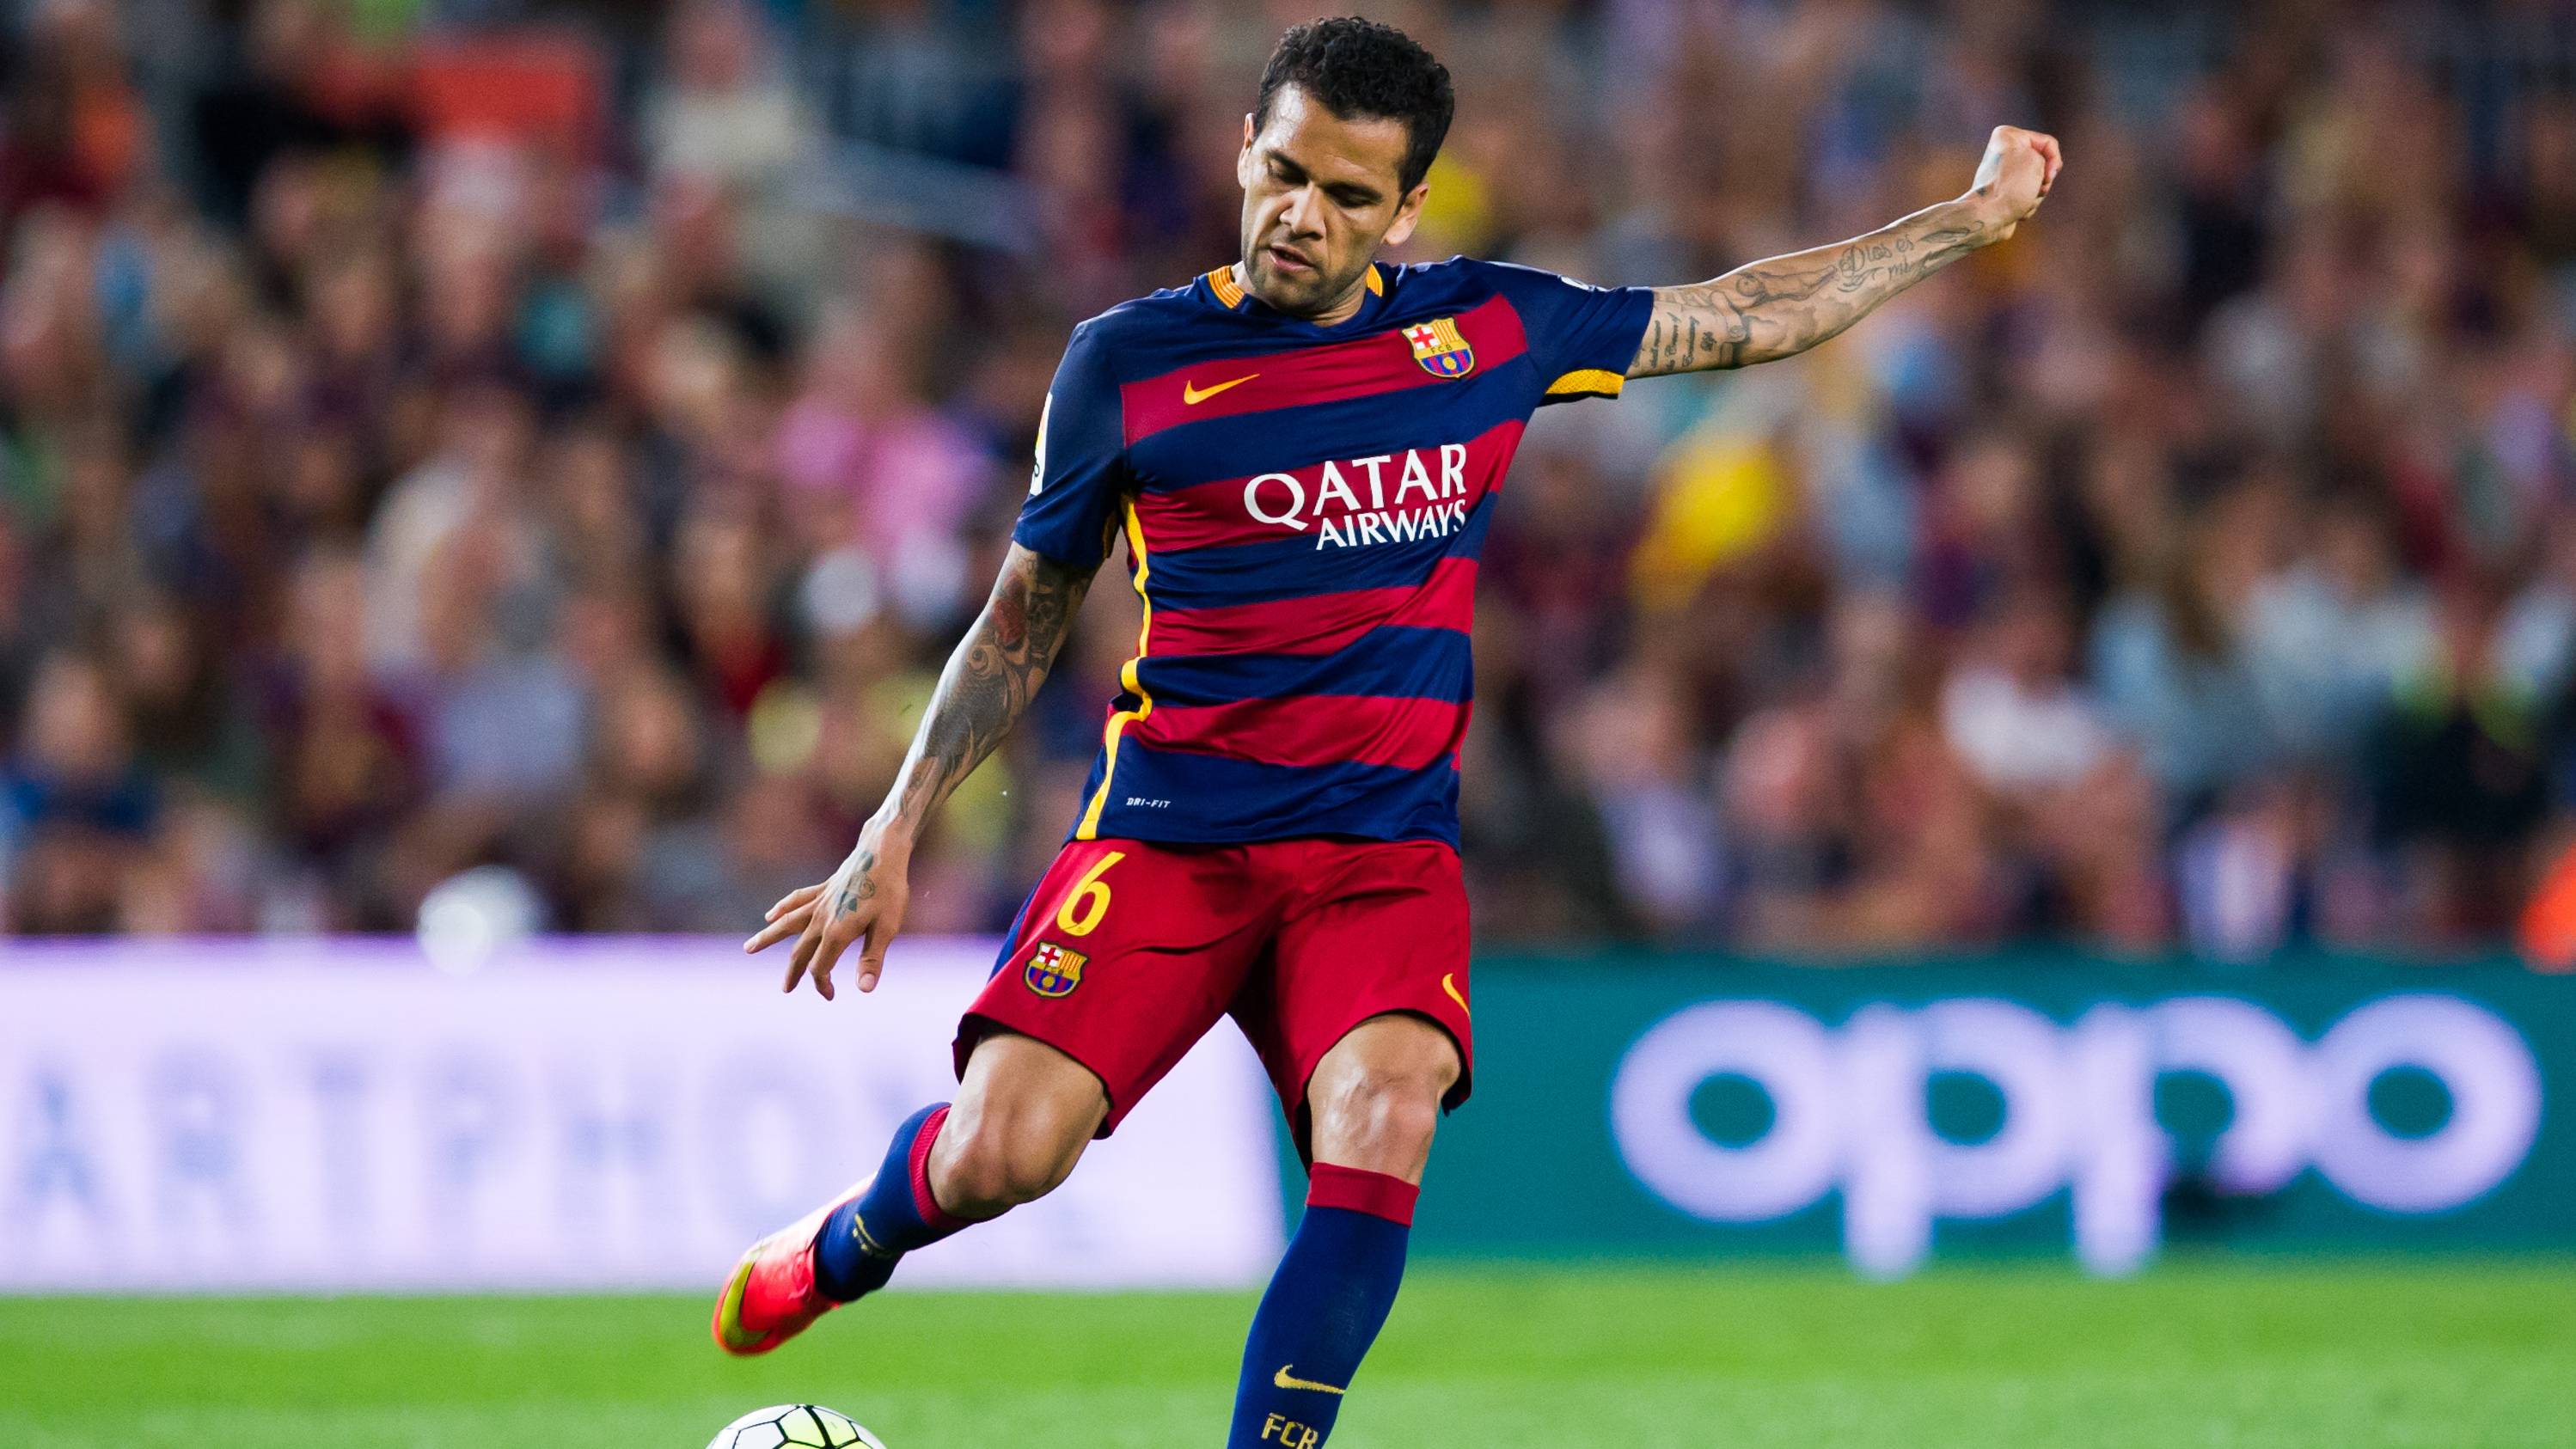 Daniel Alves could not following from the summer of 2016 in the FC Barcelona